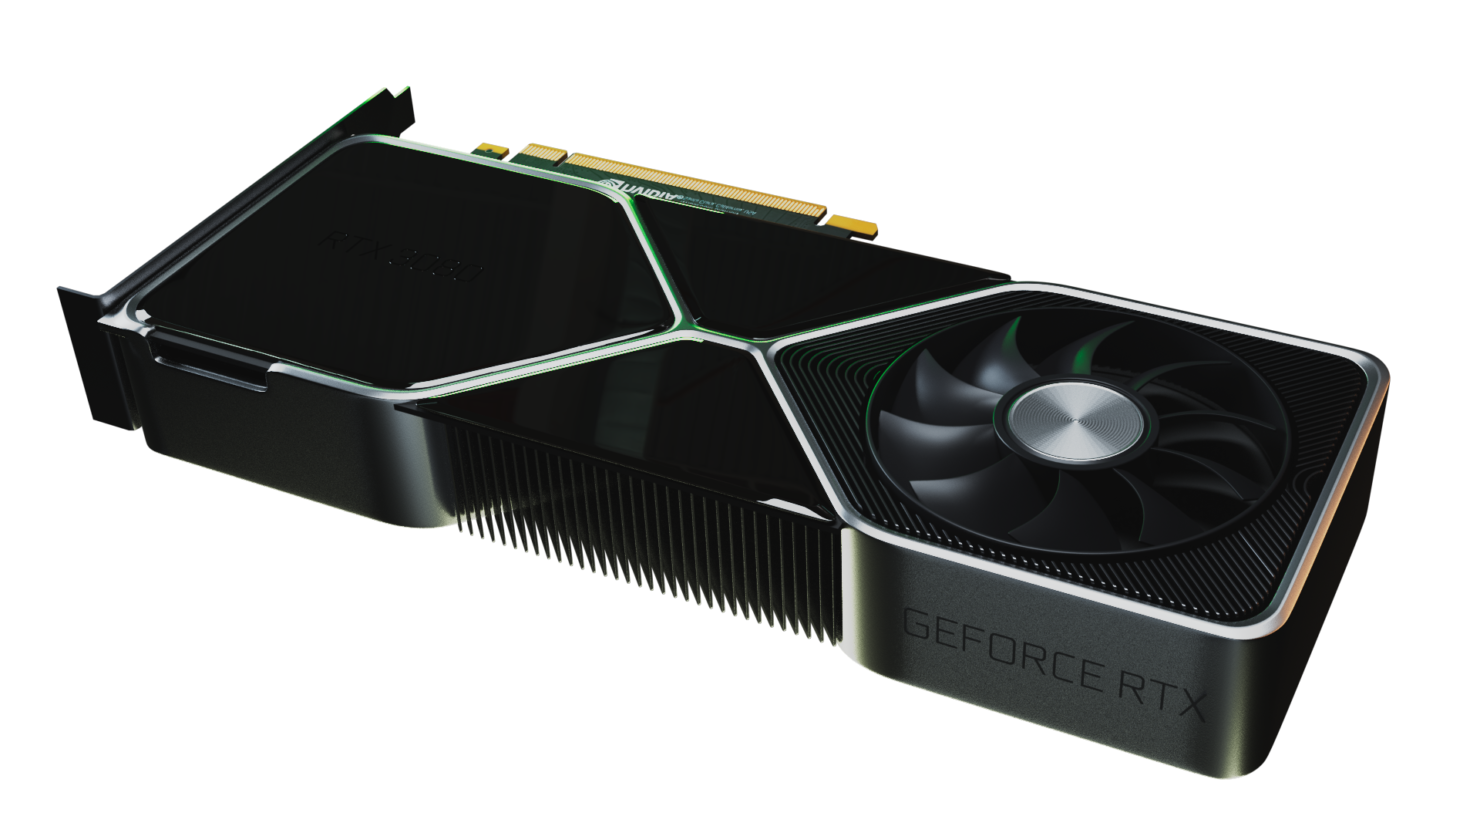 Cool flagship instead of fusion reactor: the GeForce RTX 3090 Ti turns the  efficiency list upside down with a 300-watt throttle and beats the Radeons